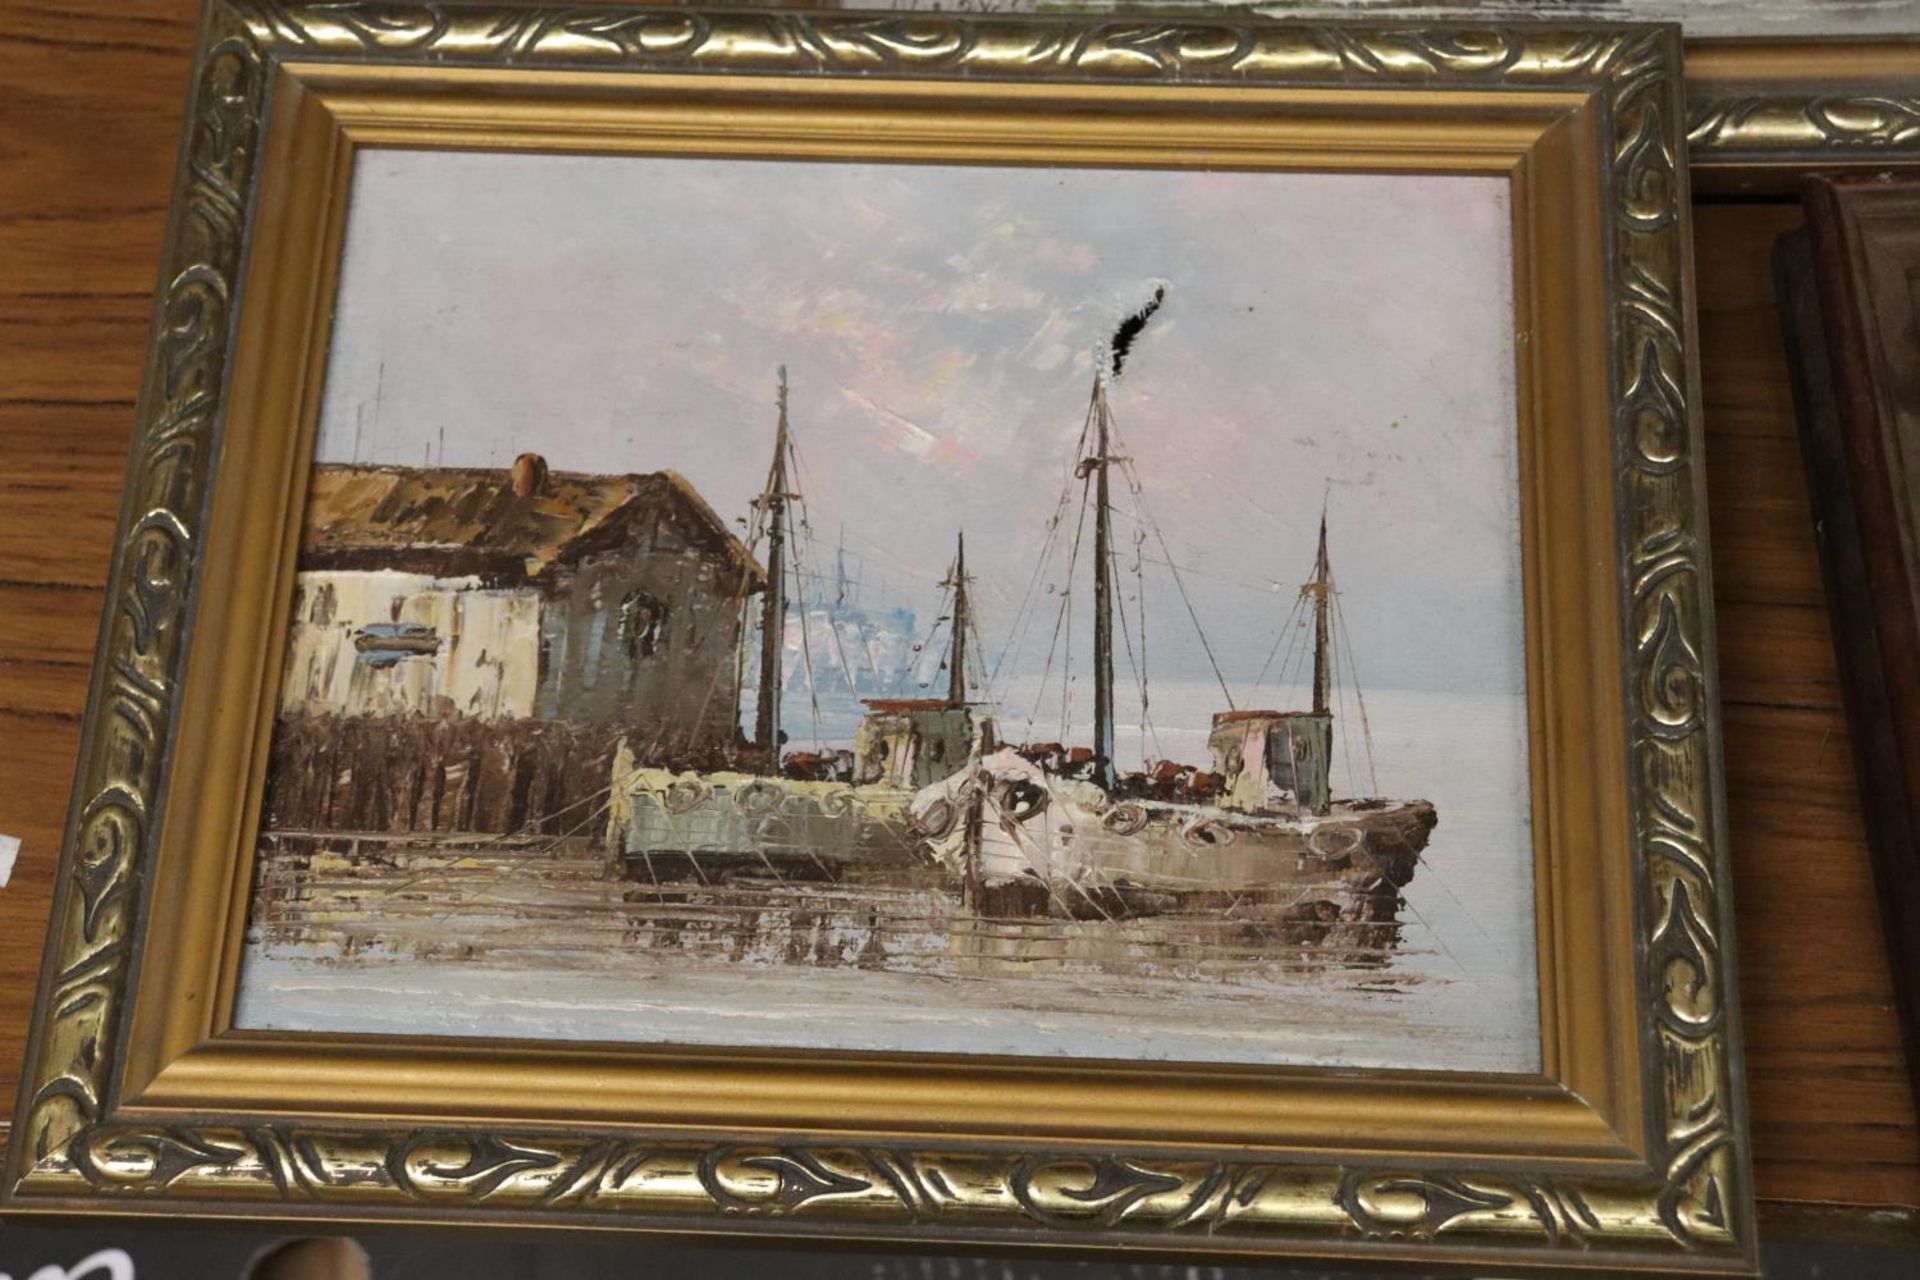 TWO FRAMED OILS ON CANVAS OF BOATS, ONE A/F, A FRAMED 3-D IMAGE OF A FISHERMAN IN A BOAT, PLUS A - Image 2 of 5